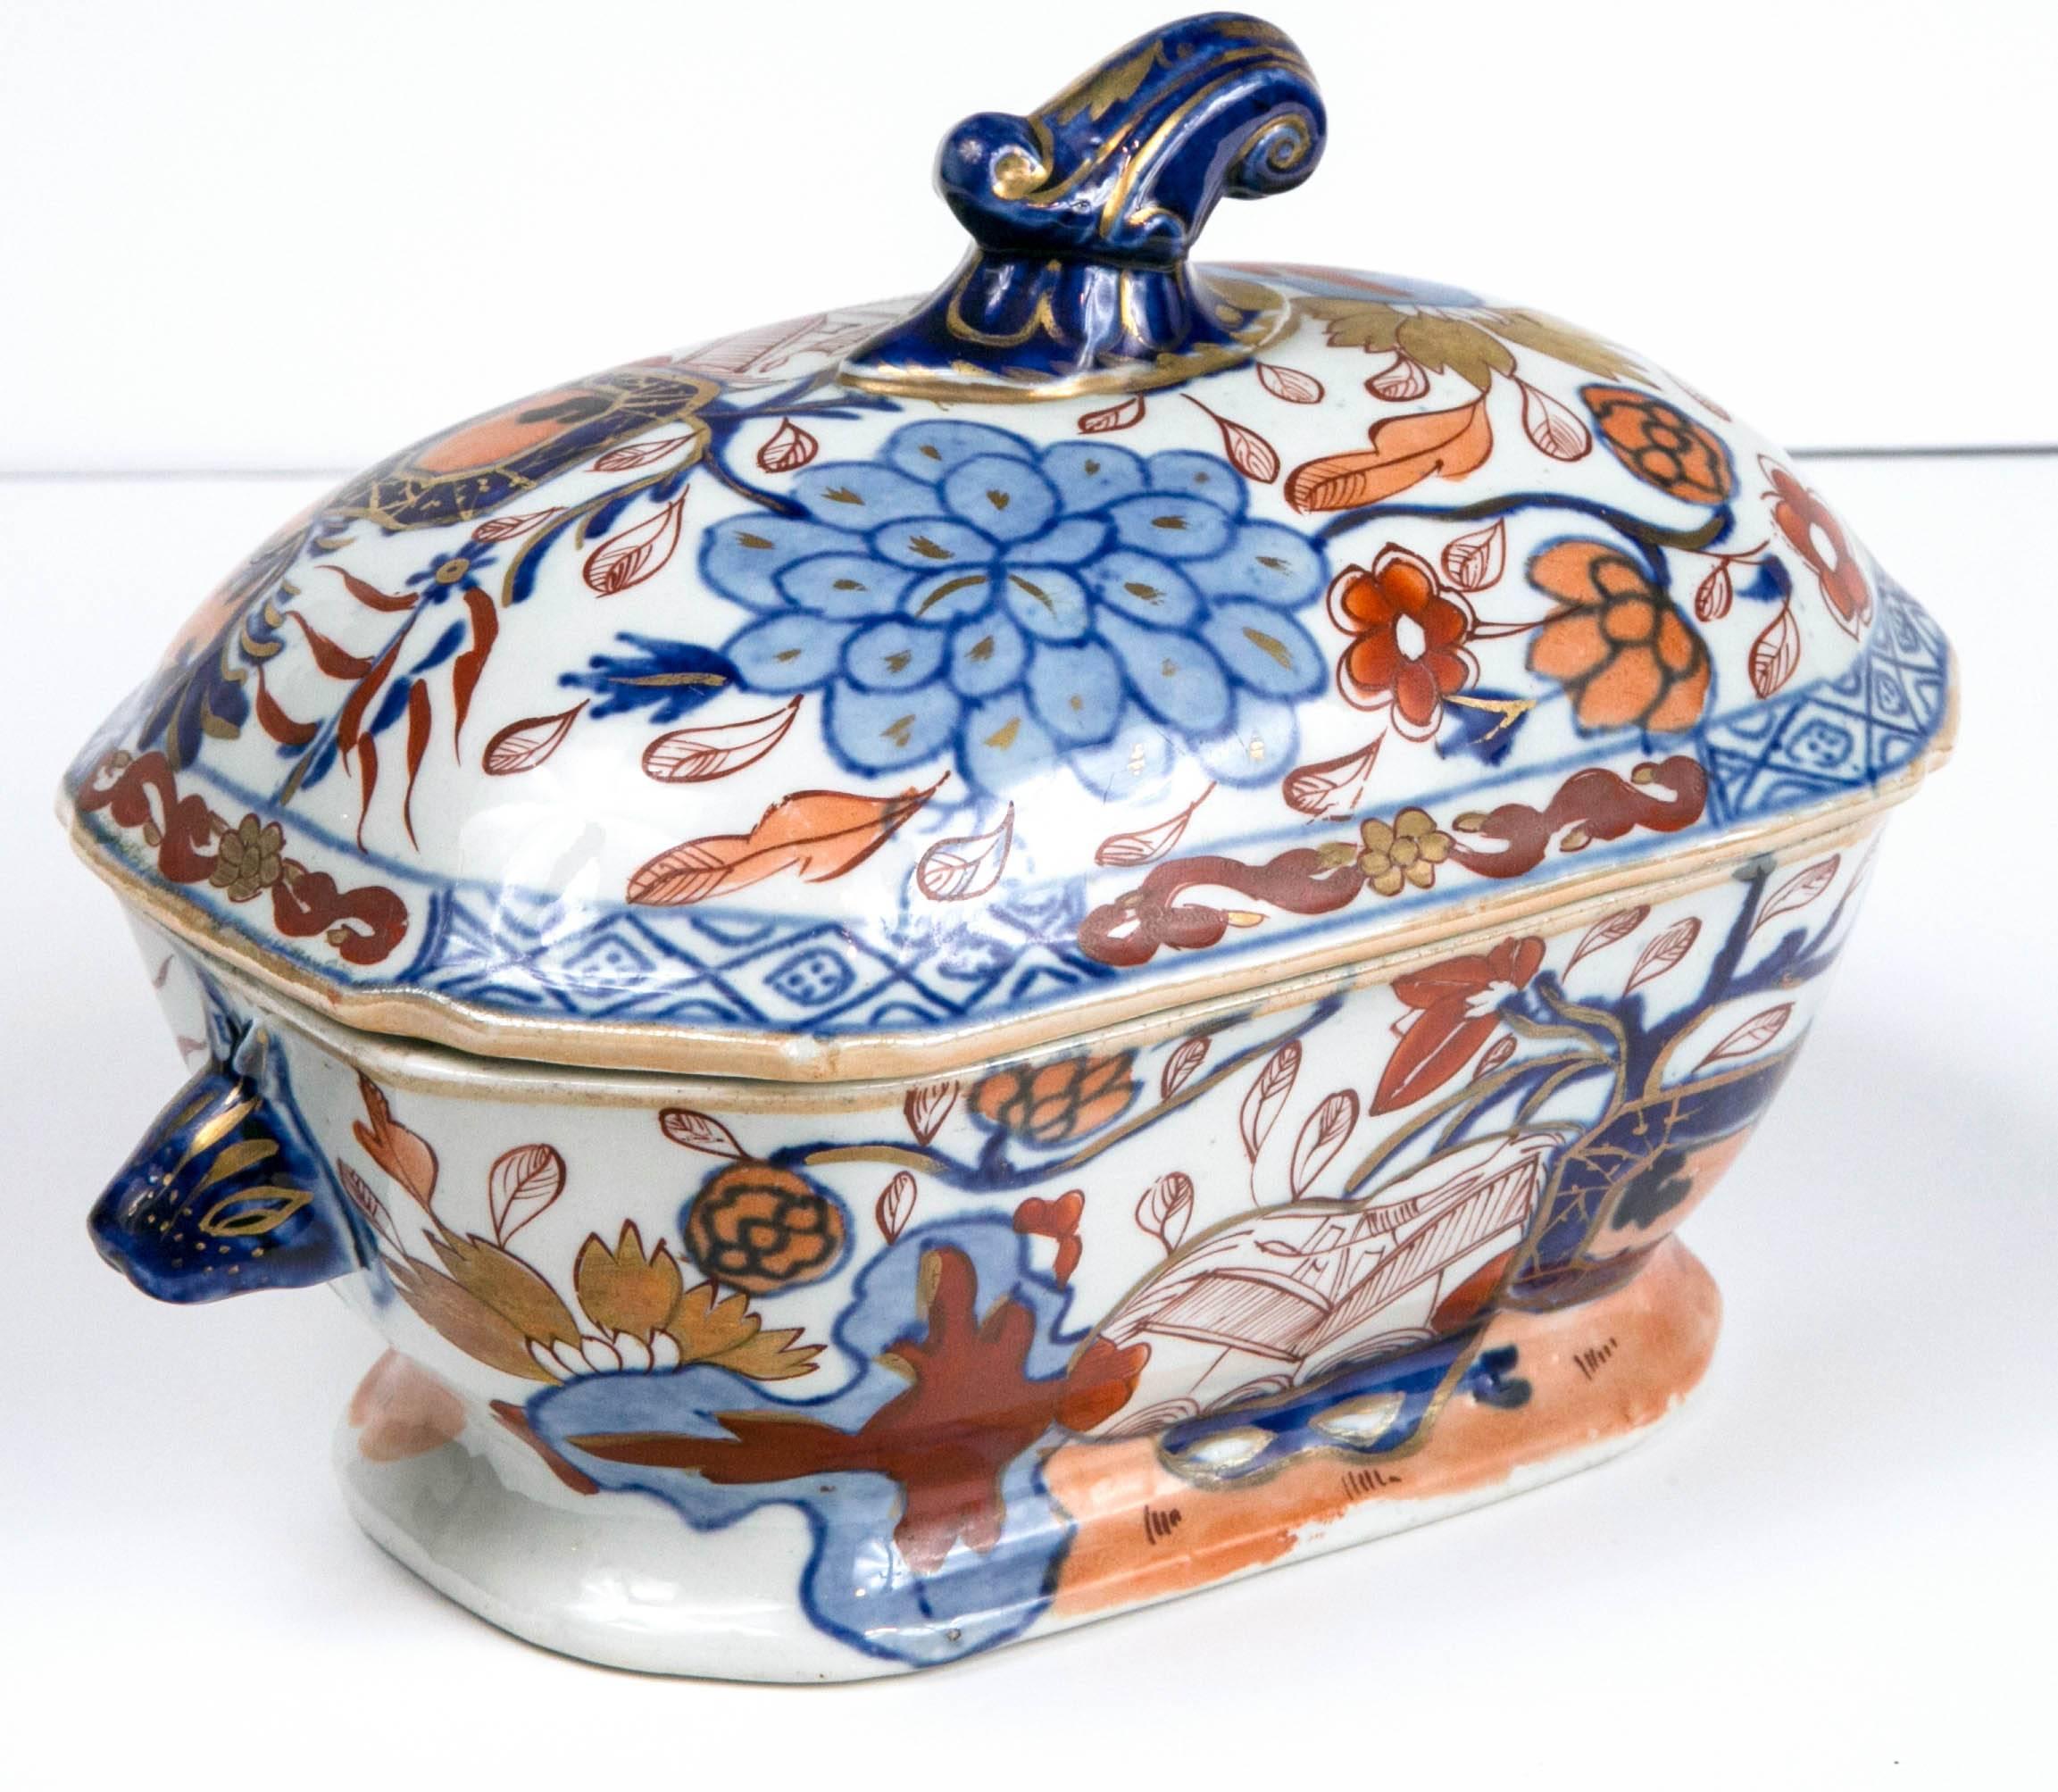 An English ironstone Imari patterned tureen with lid. Hand-painted in rich blue and red/orange decorations.